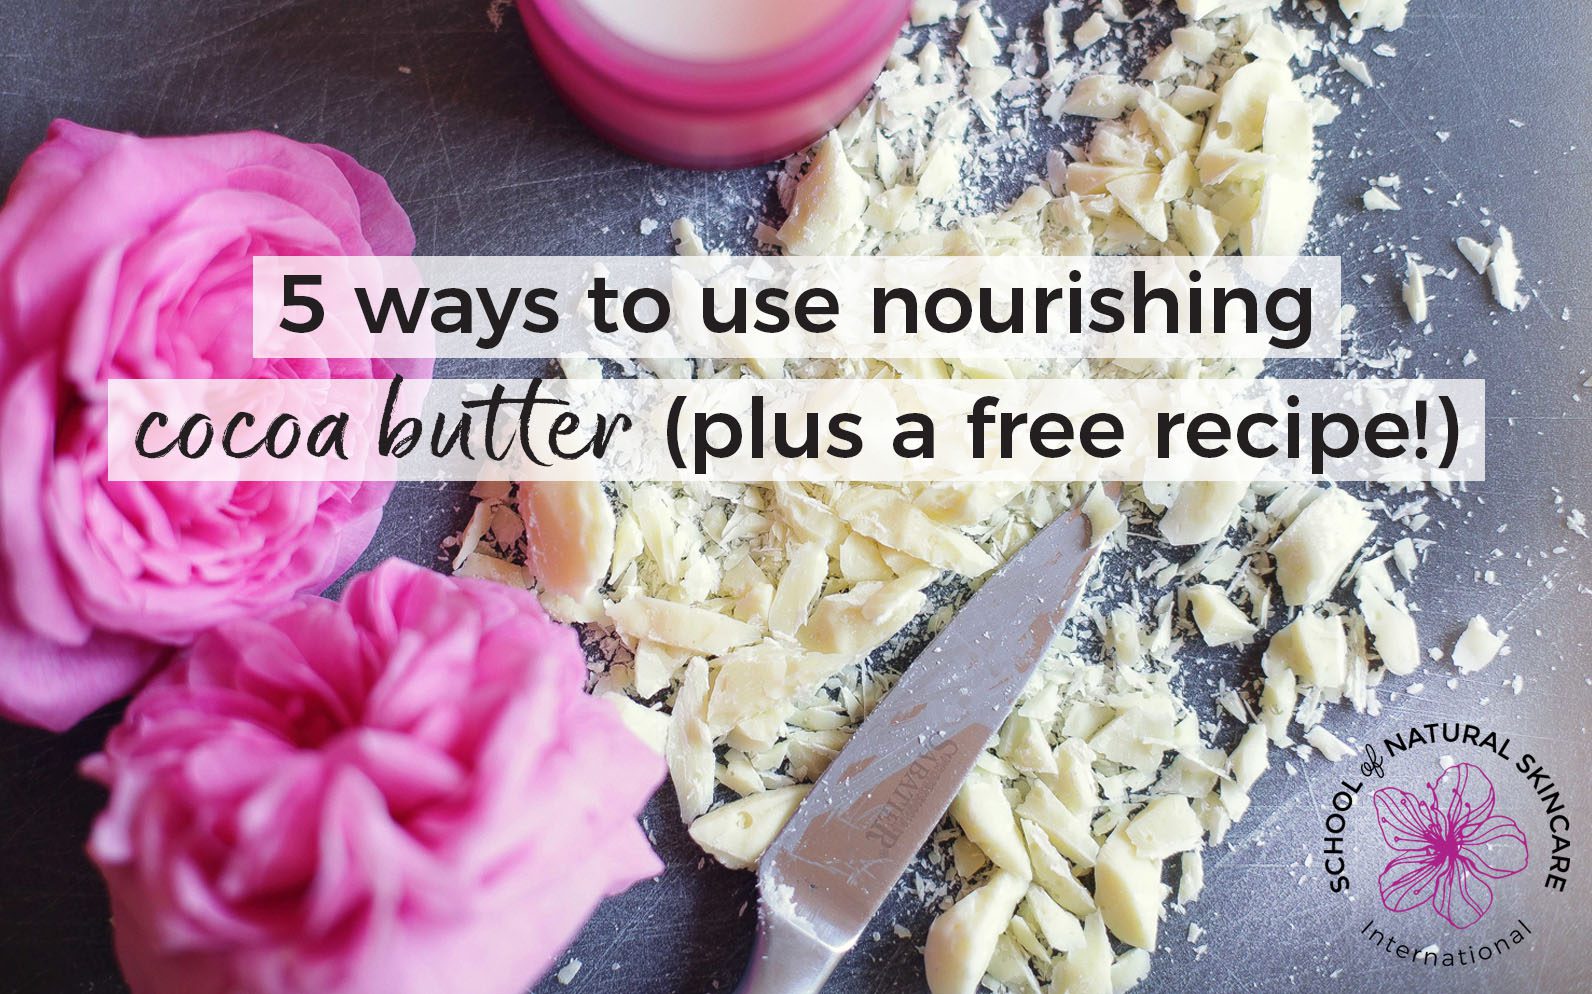 5 Ways To Use Nourishing Cocoa Butter Plus A Free Recipe